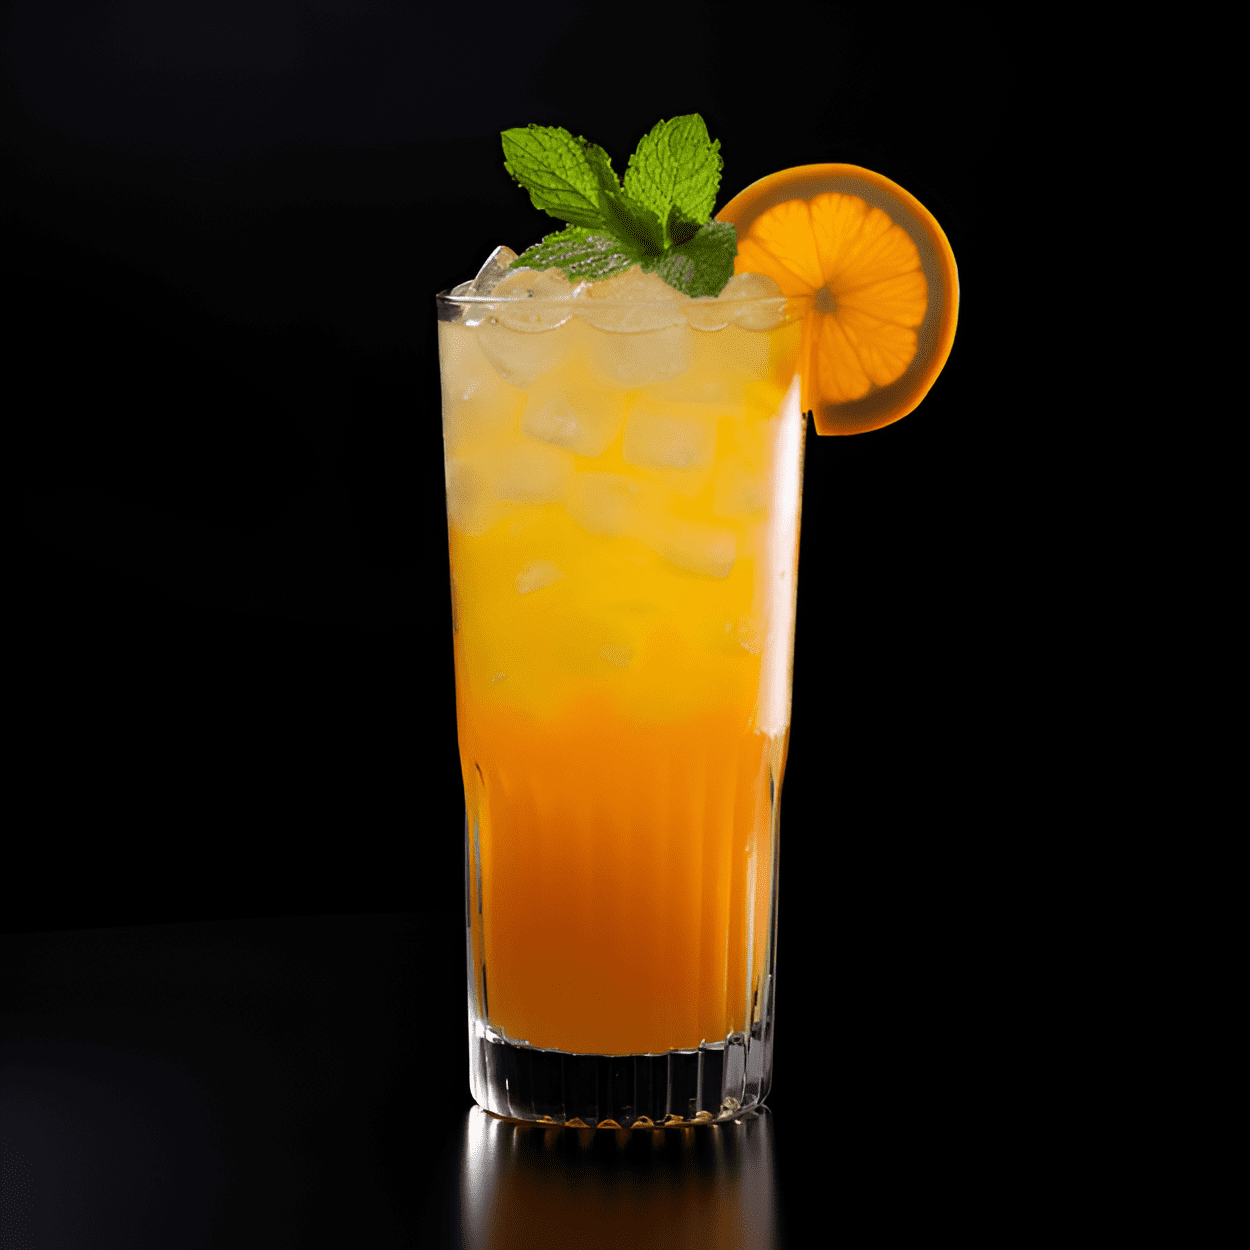 Tic Tac Cocktail Recipe - The Tic Tac cocktail is sweet, refreshing, and slightly minty. It has a light, crisp taste with a hint of citrus from the orange liqueur. The vodka gives it a bit of a kick, but it's not too strong, making it a perfect summer drink.